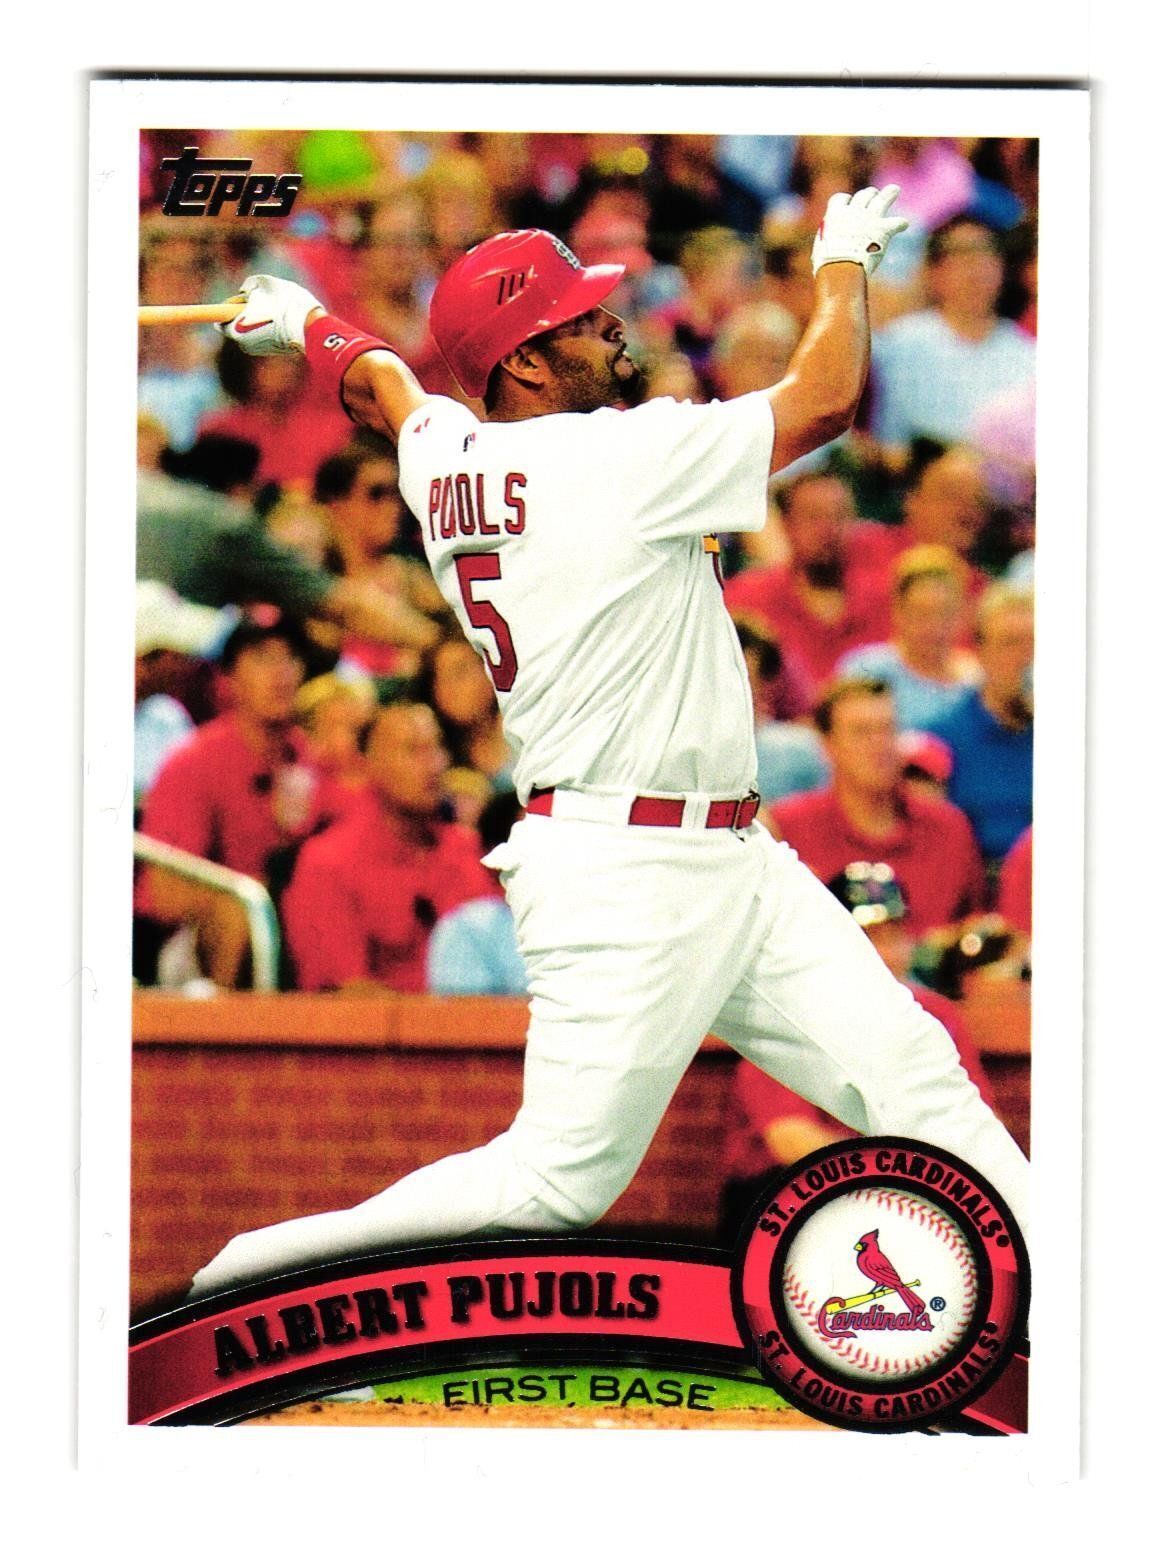 Primary image for 2011 Topps Baseball Albert Pujols 100 St Louis Cardinals First Base Card